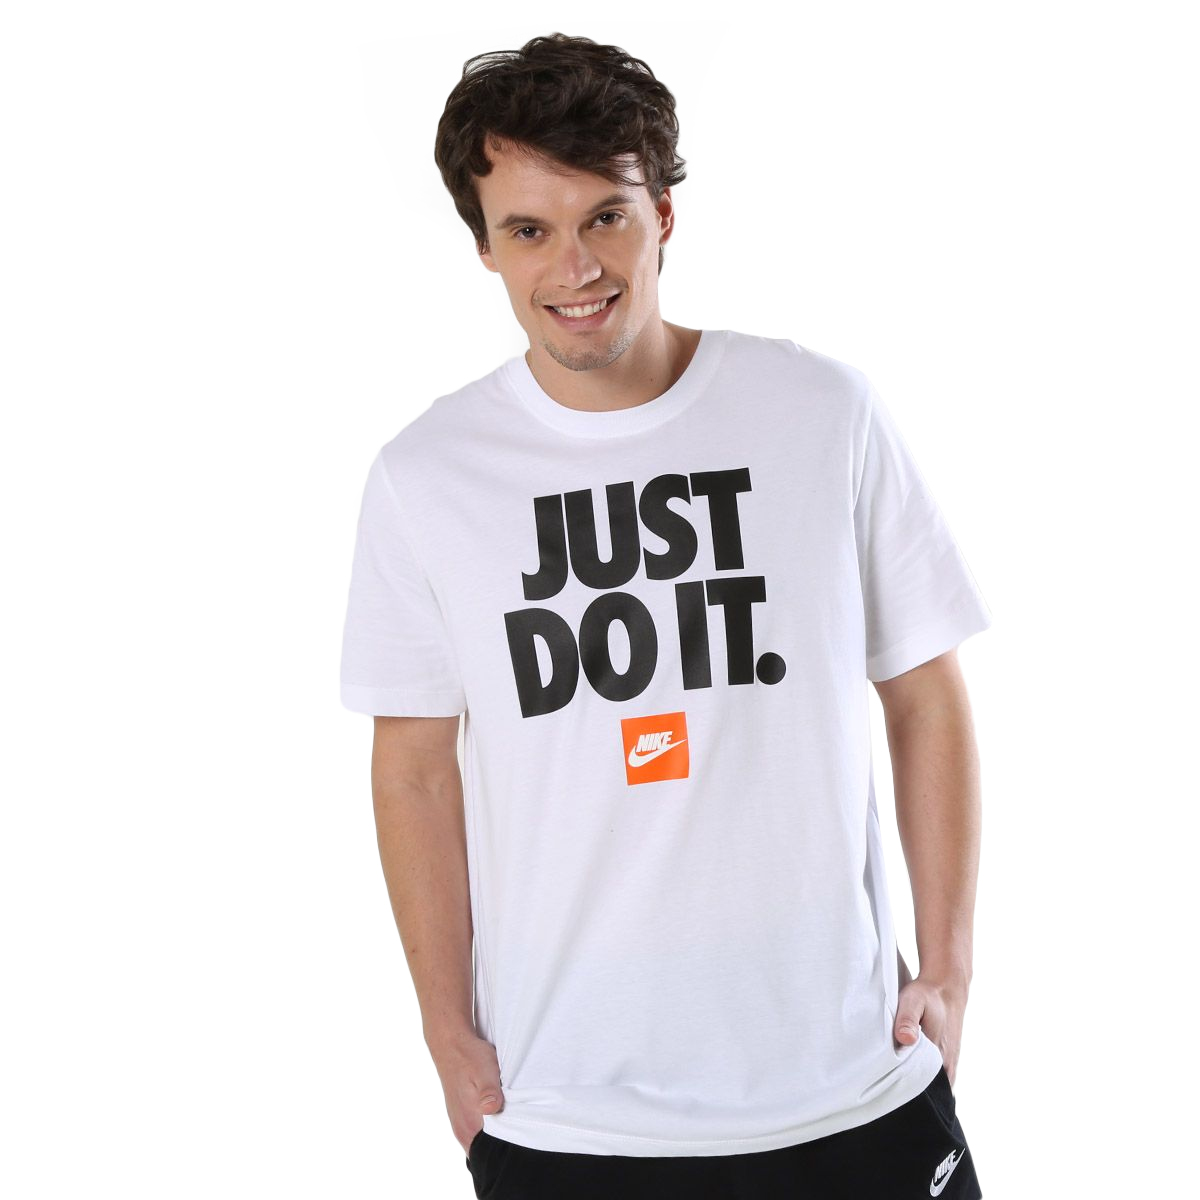 Just Do It | StockCenter